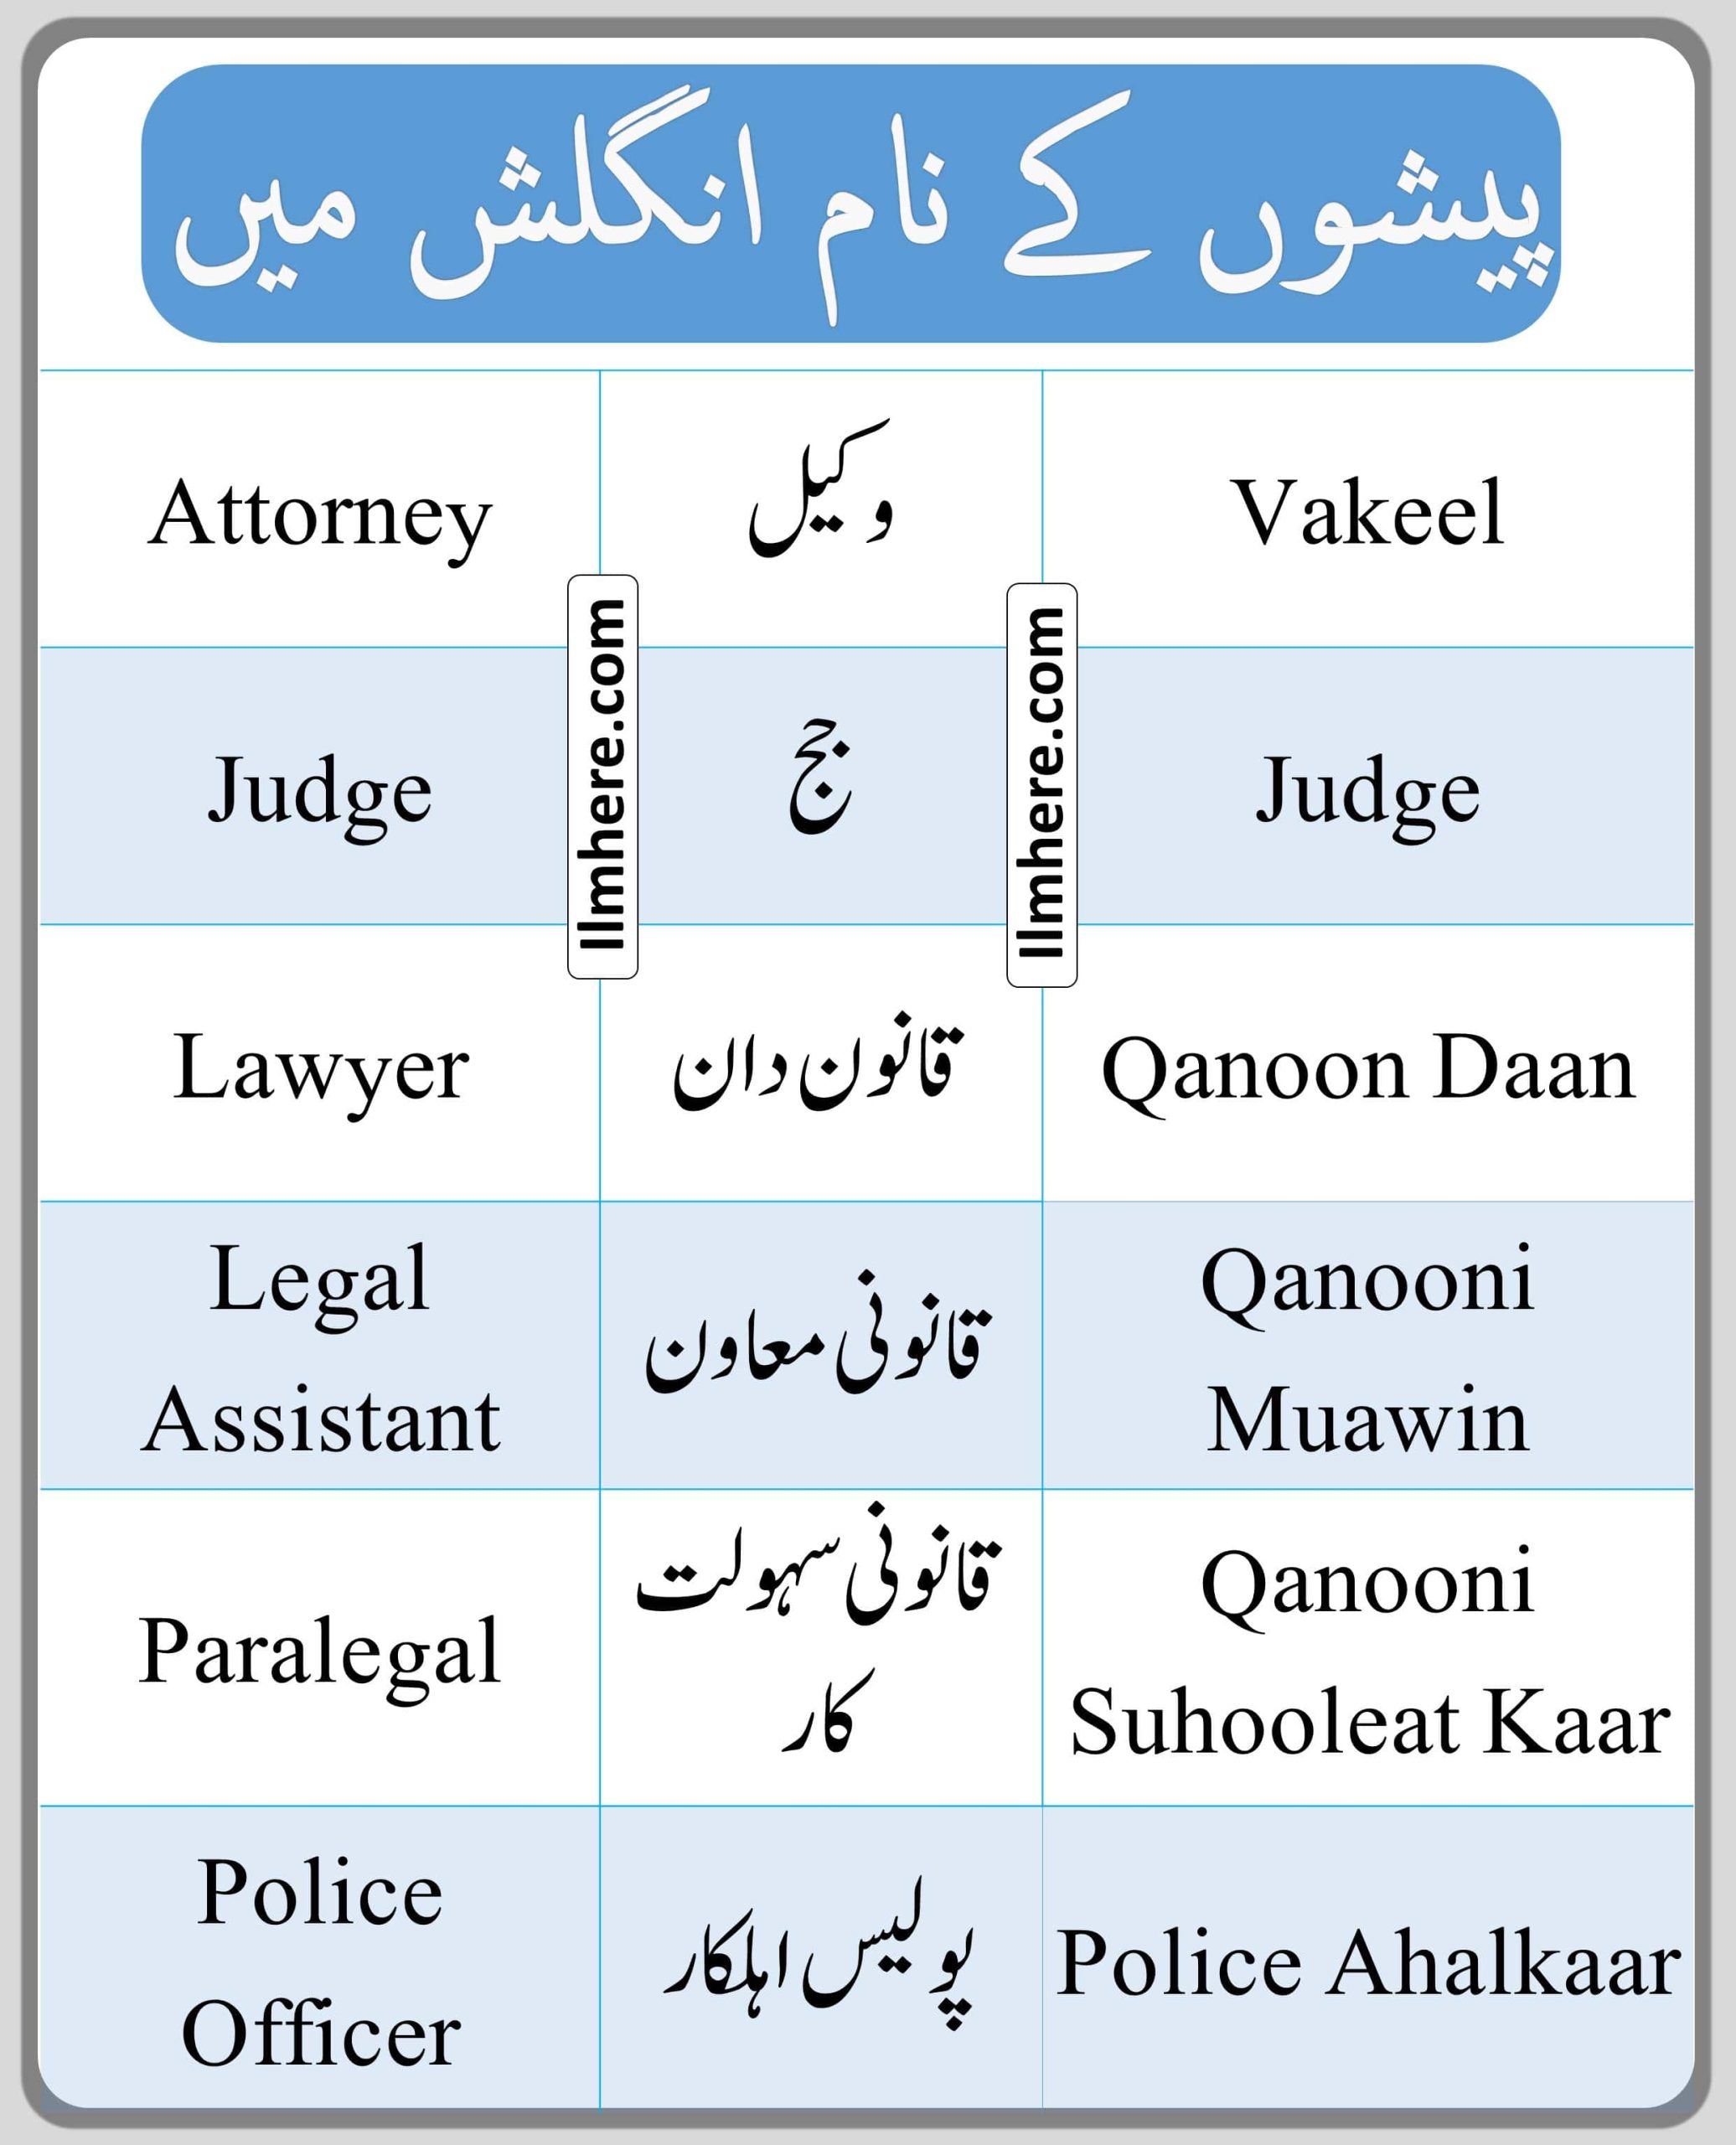 Profession Names related to law and criminal justice